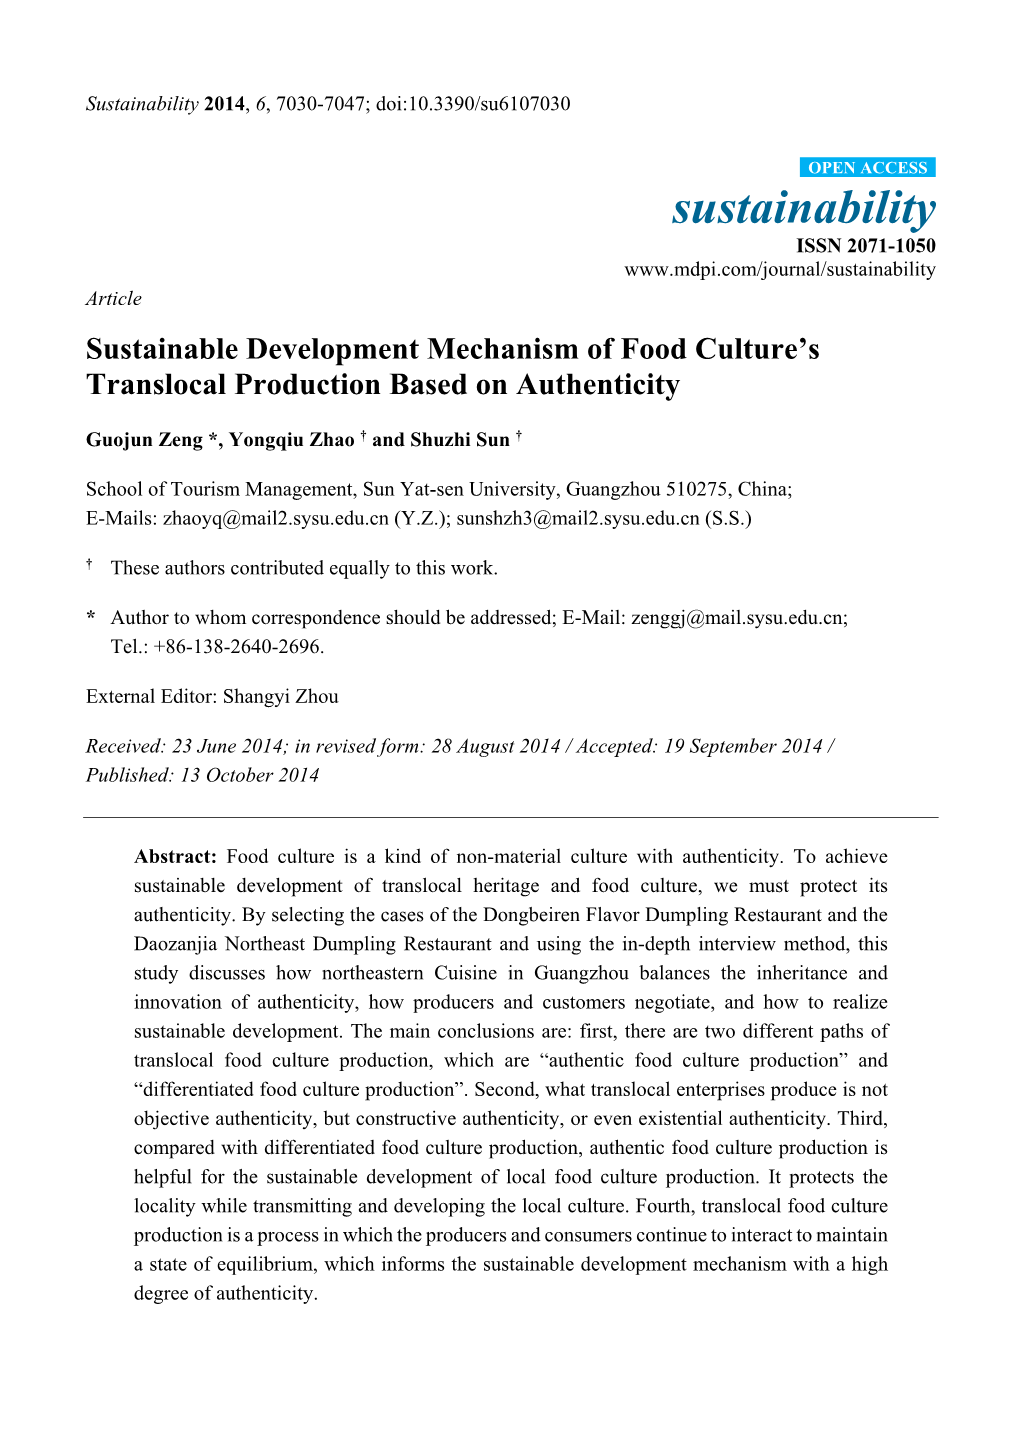 Sustainable Development Mechanism of Food Culture's Translocal